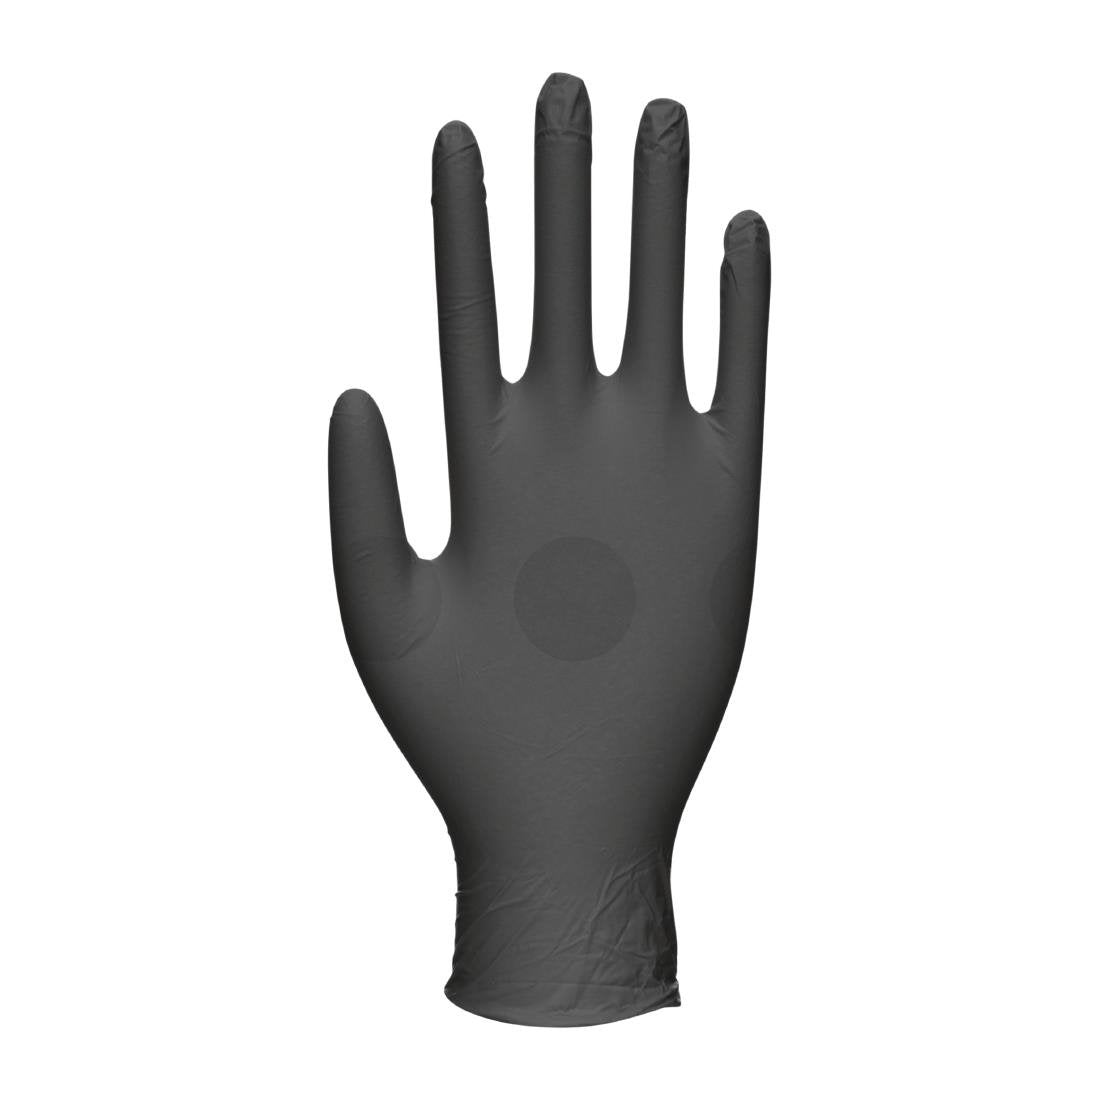 FW845-XL Biotouch Single Use Glove Black Nitrile Powder Free Size XL (Pack of 100)